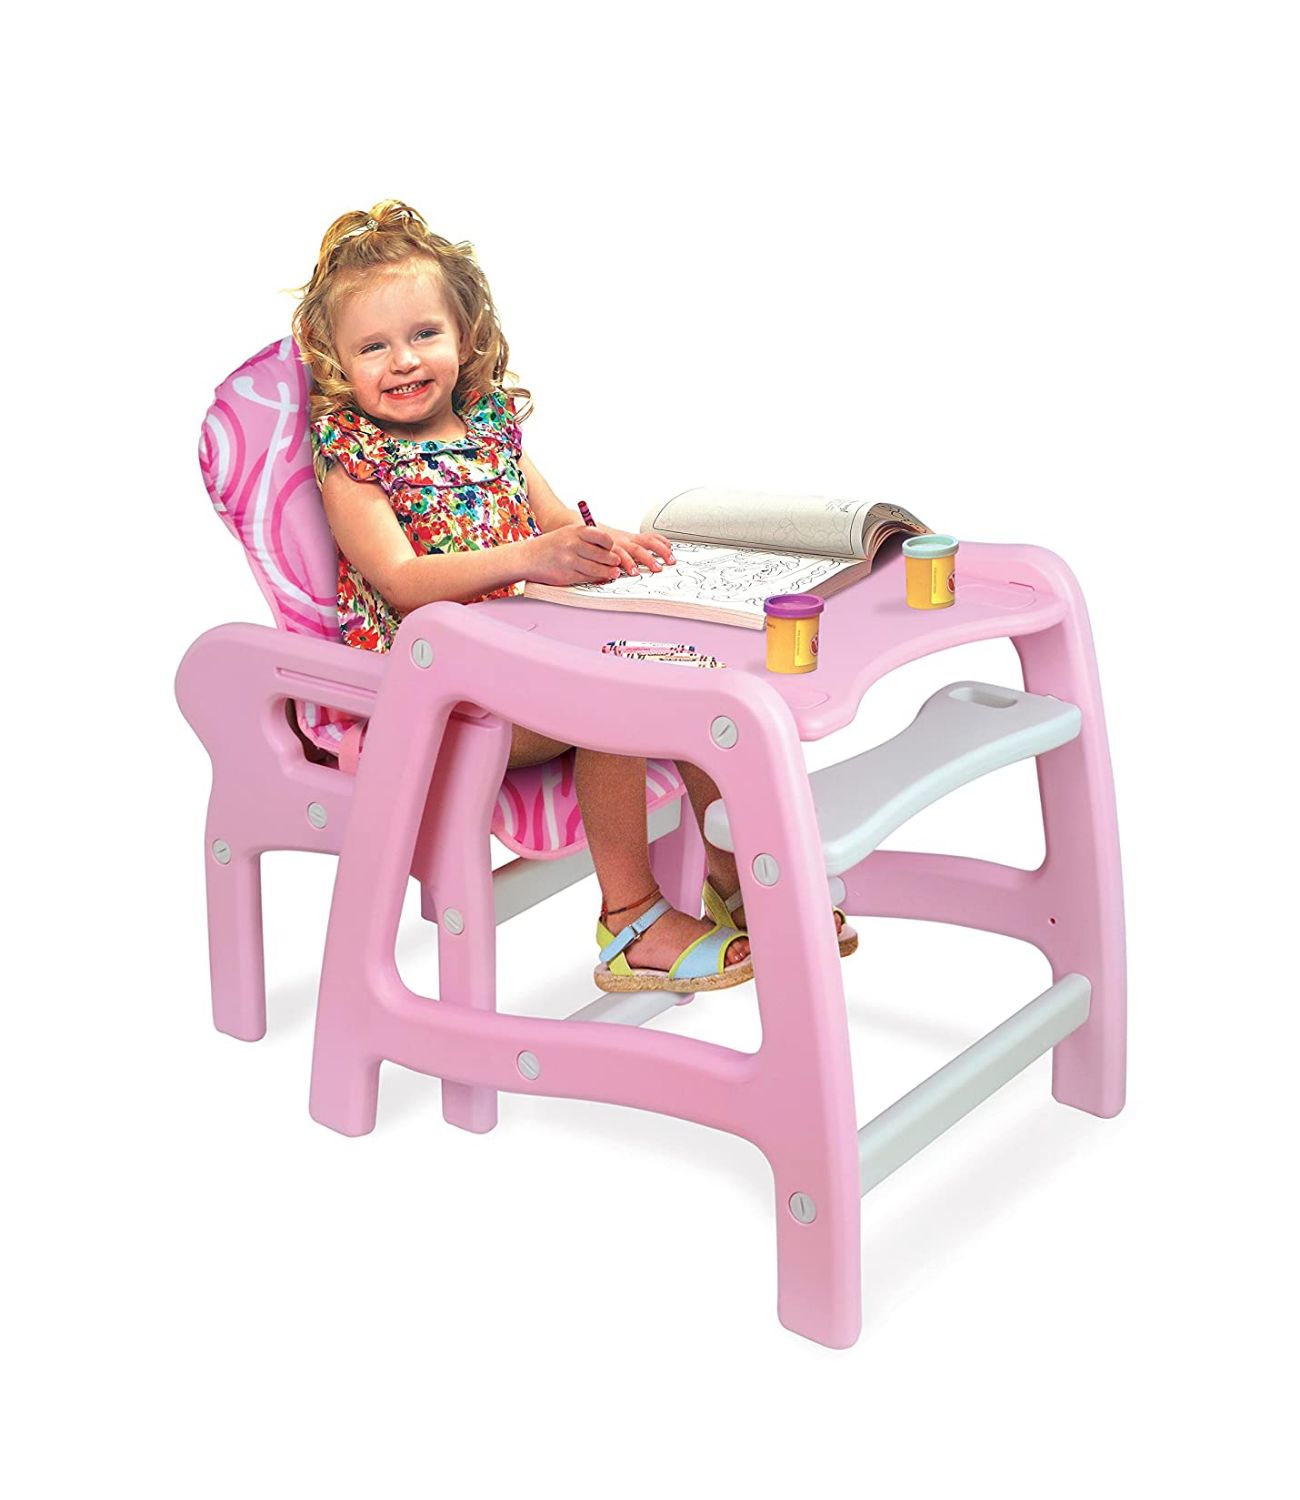 Badger Basket Baby High Chair with Toddler Playtable and Chair Conversion